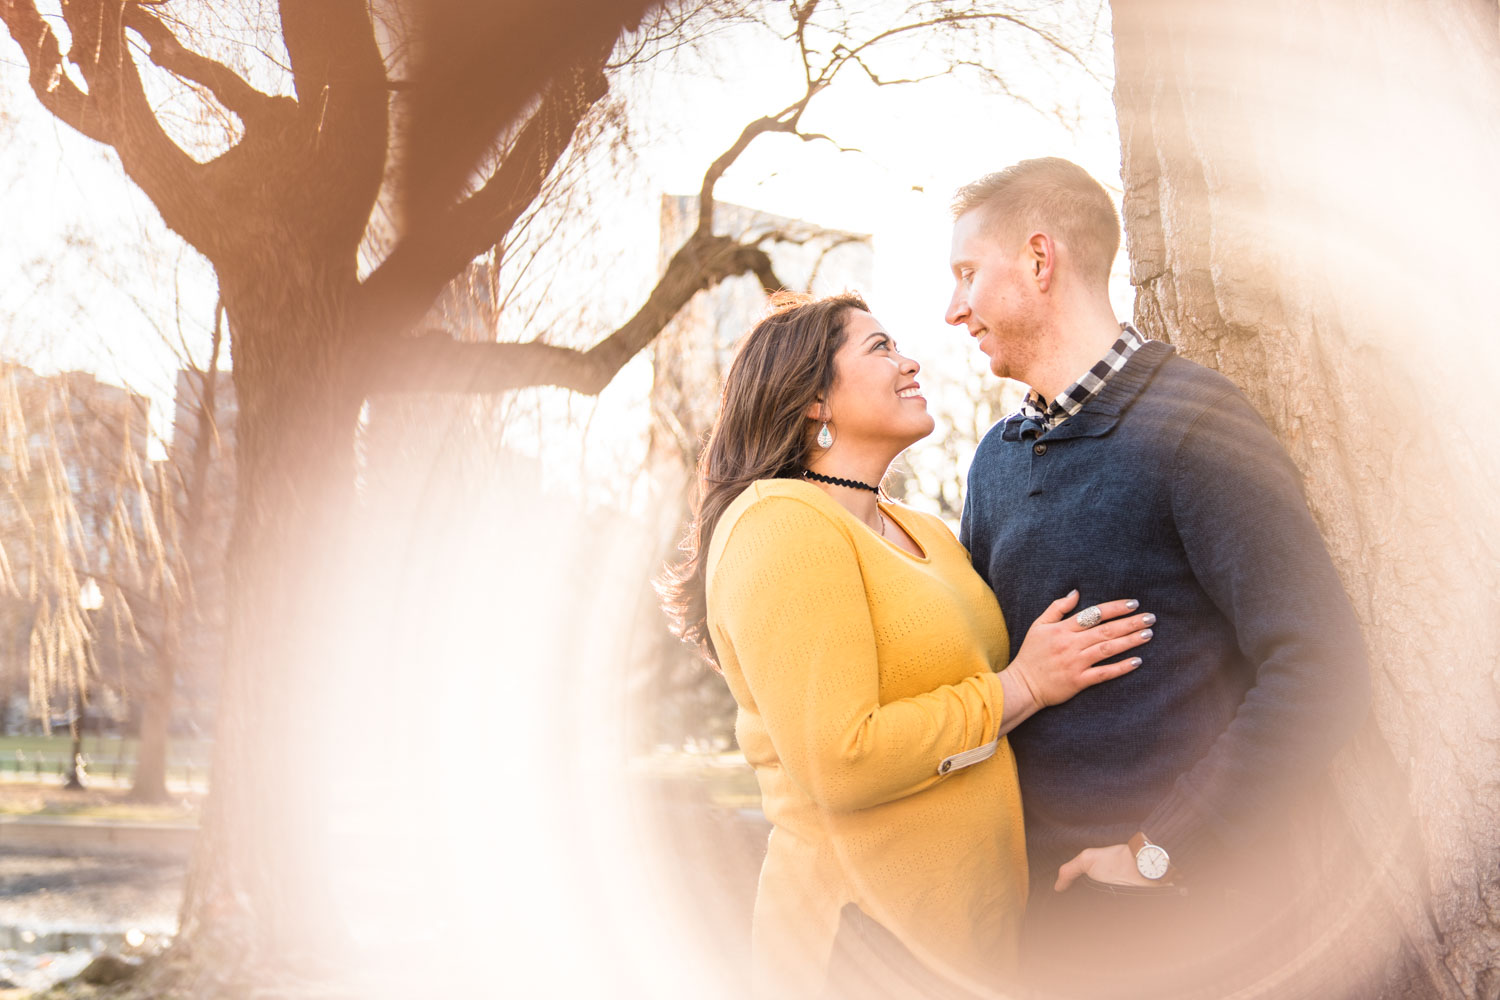 Andrea + Scott | Dog Lovers Boston Public Garden Casual Spring Sunrise Creative Engagement Session | Boston and New England Engagement Photography | Lorna Stell Photo